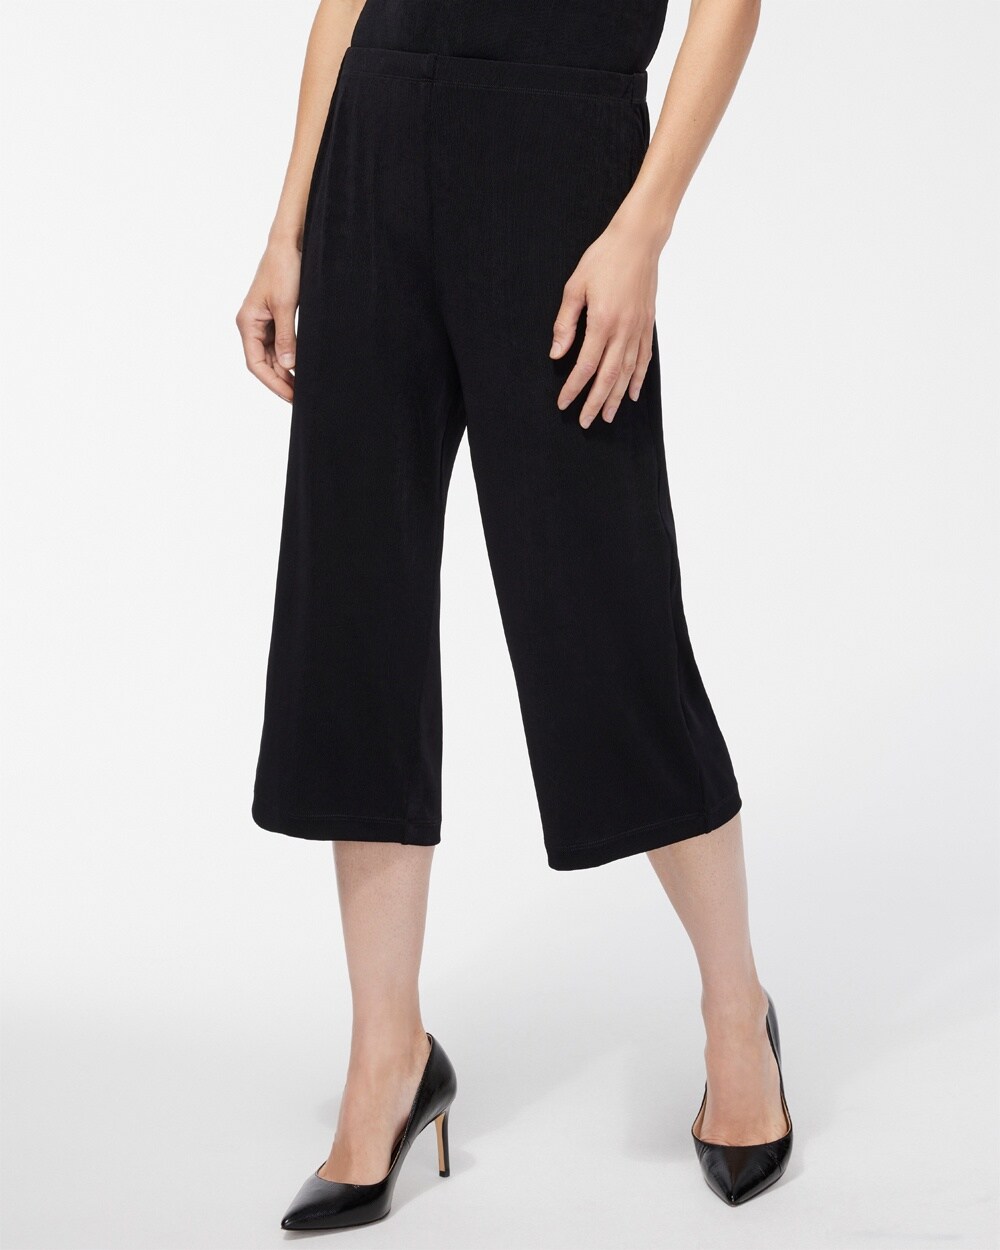 Travelers Classic Meredith Cropped Pants - Chico's